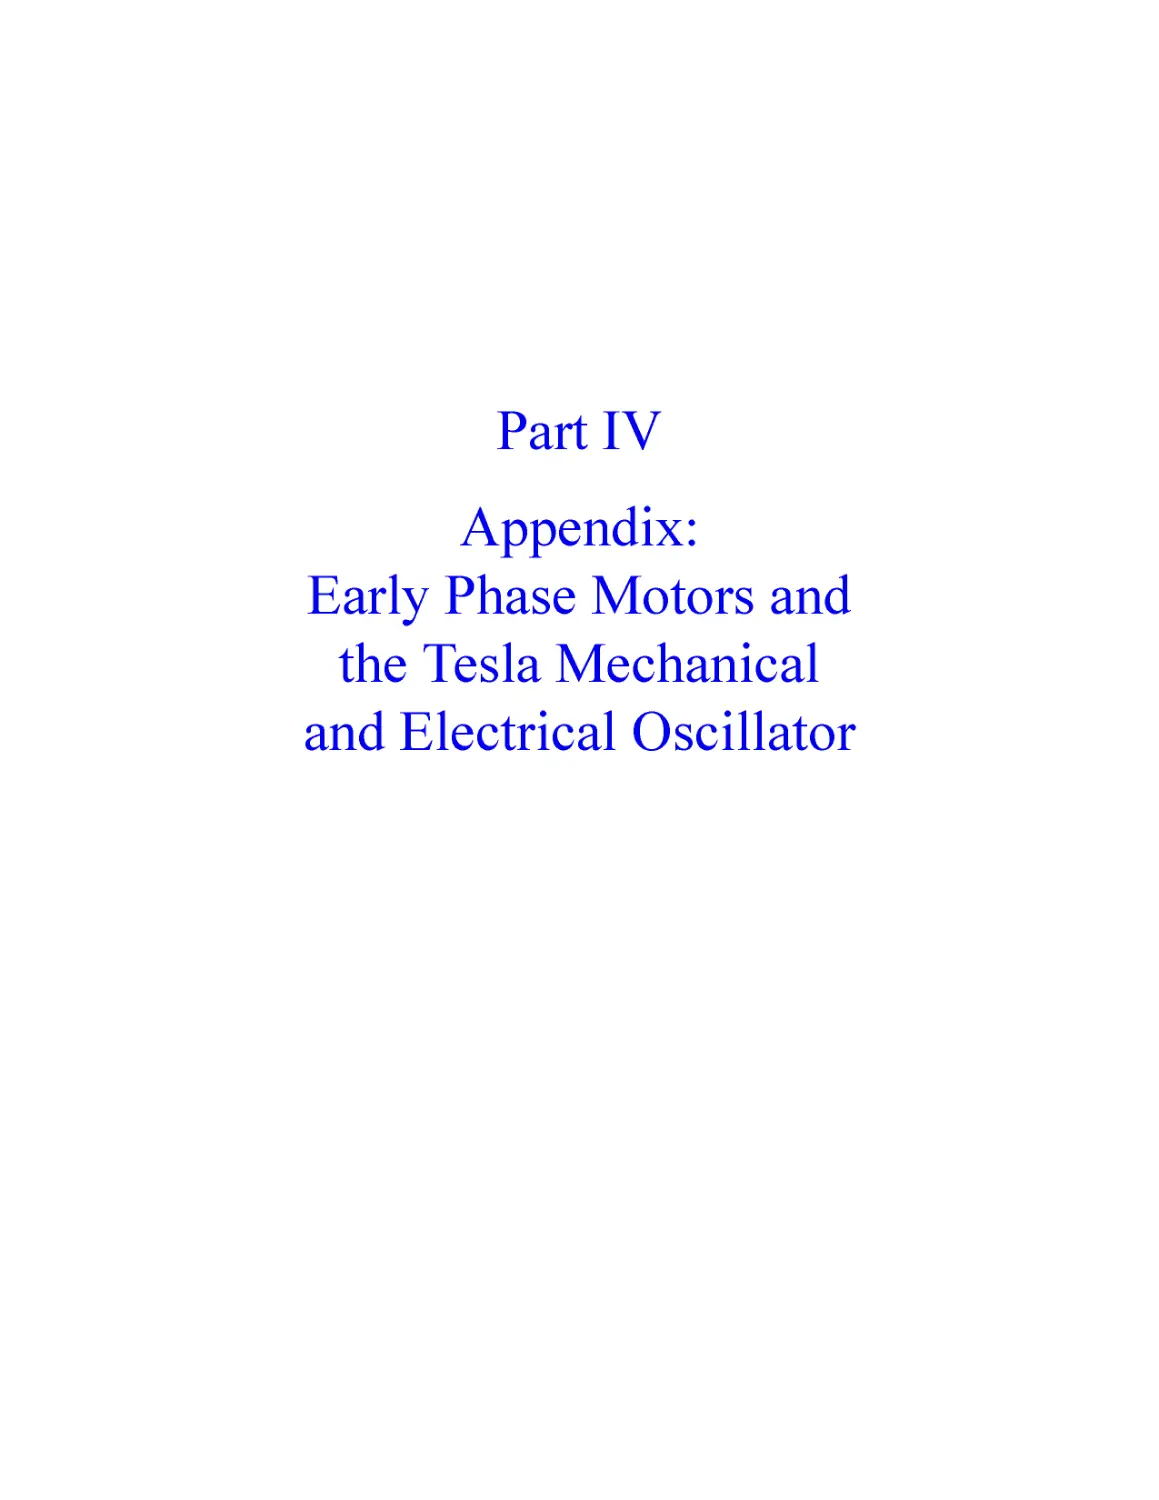 ﻿Part IV: Appendix: Early Phase Motors and the Tesla Mechanical and Electrical Oscillato